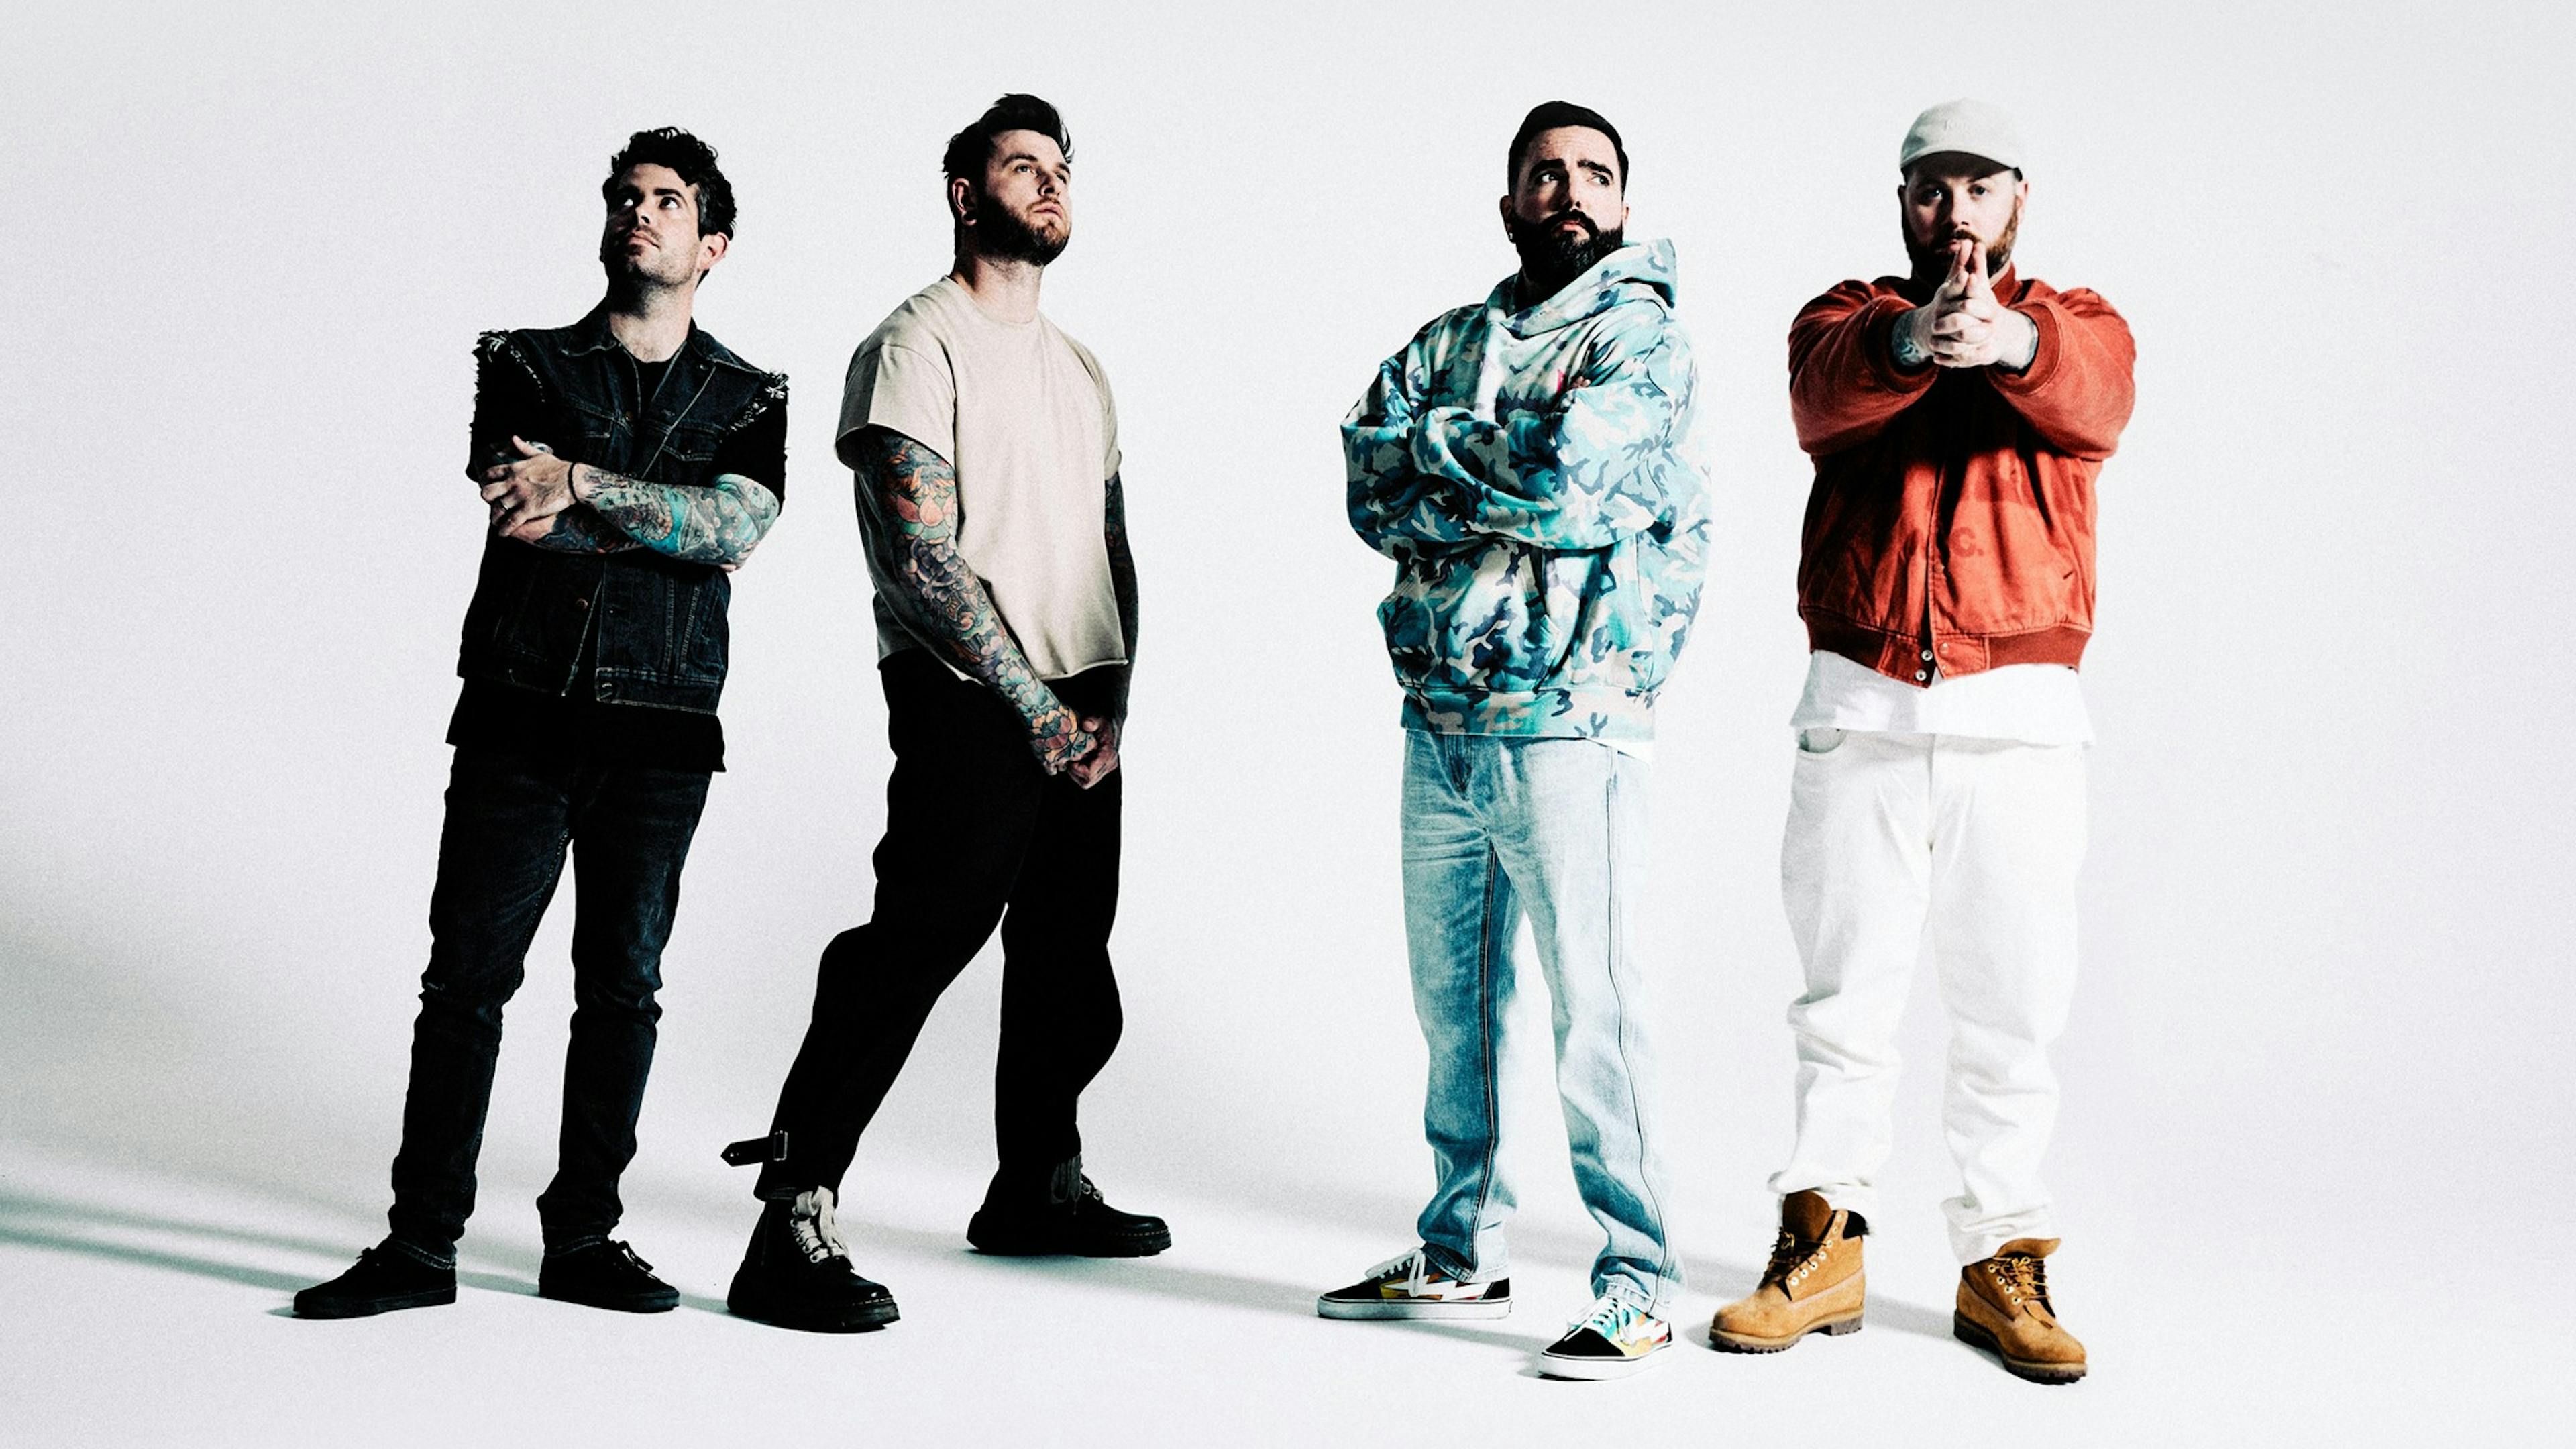 Here’s A Day To Remember’s setlist from The Least Anticipated Album Tour